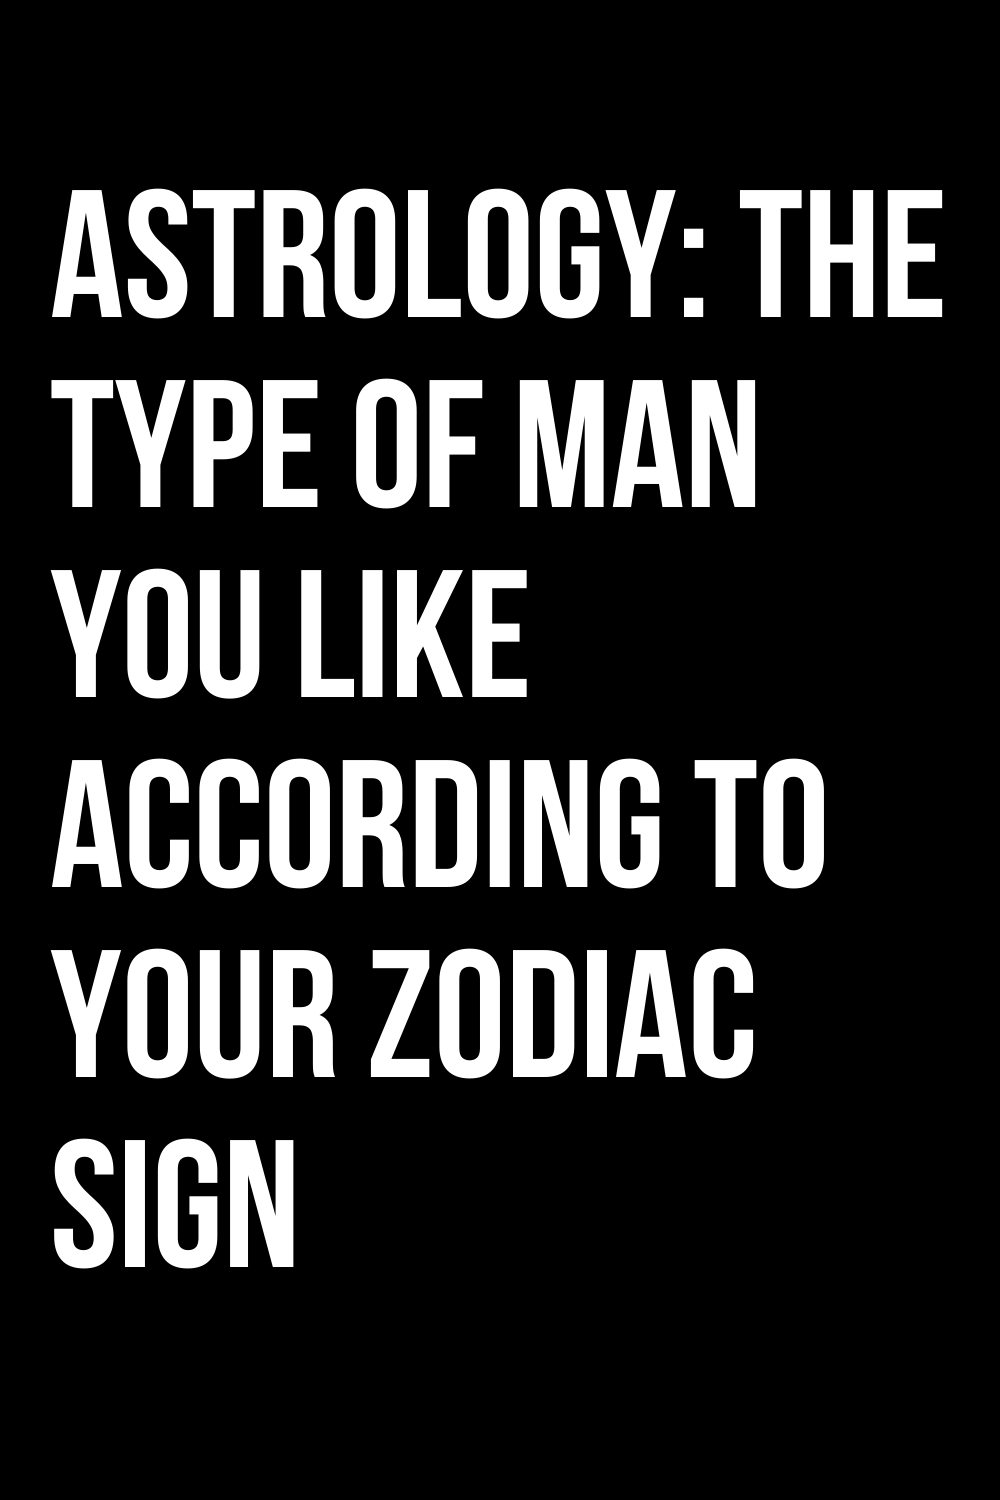 ASTROLOGY: THE TYPE OF MAN YOU LIKE ACCORDING TO YOUR ZODIAC SIGN ...